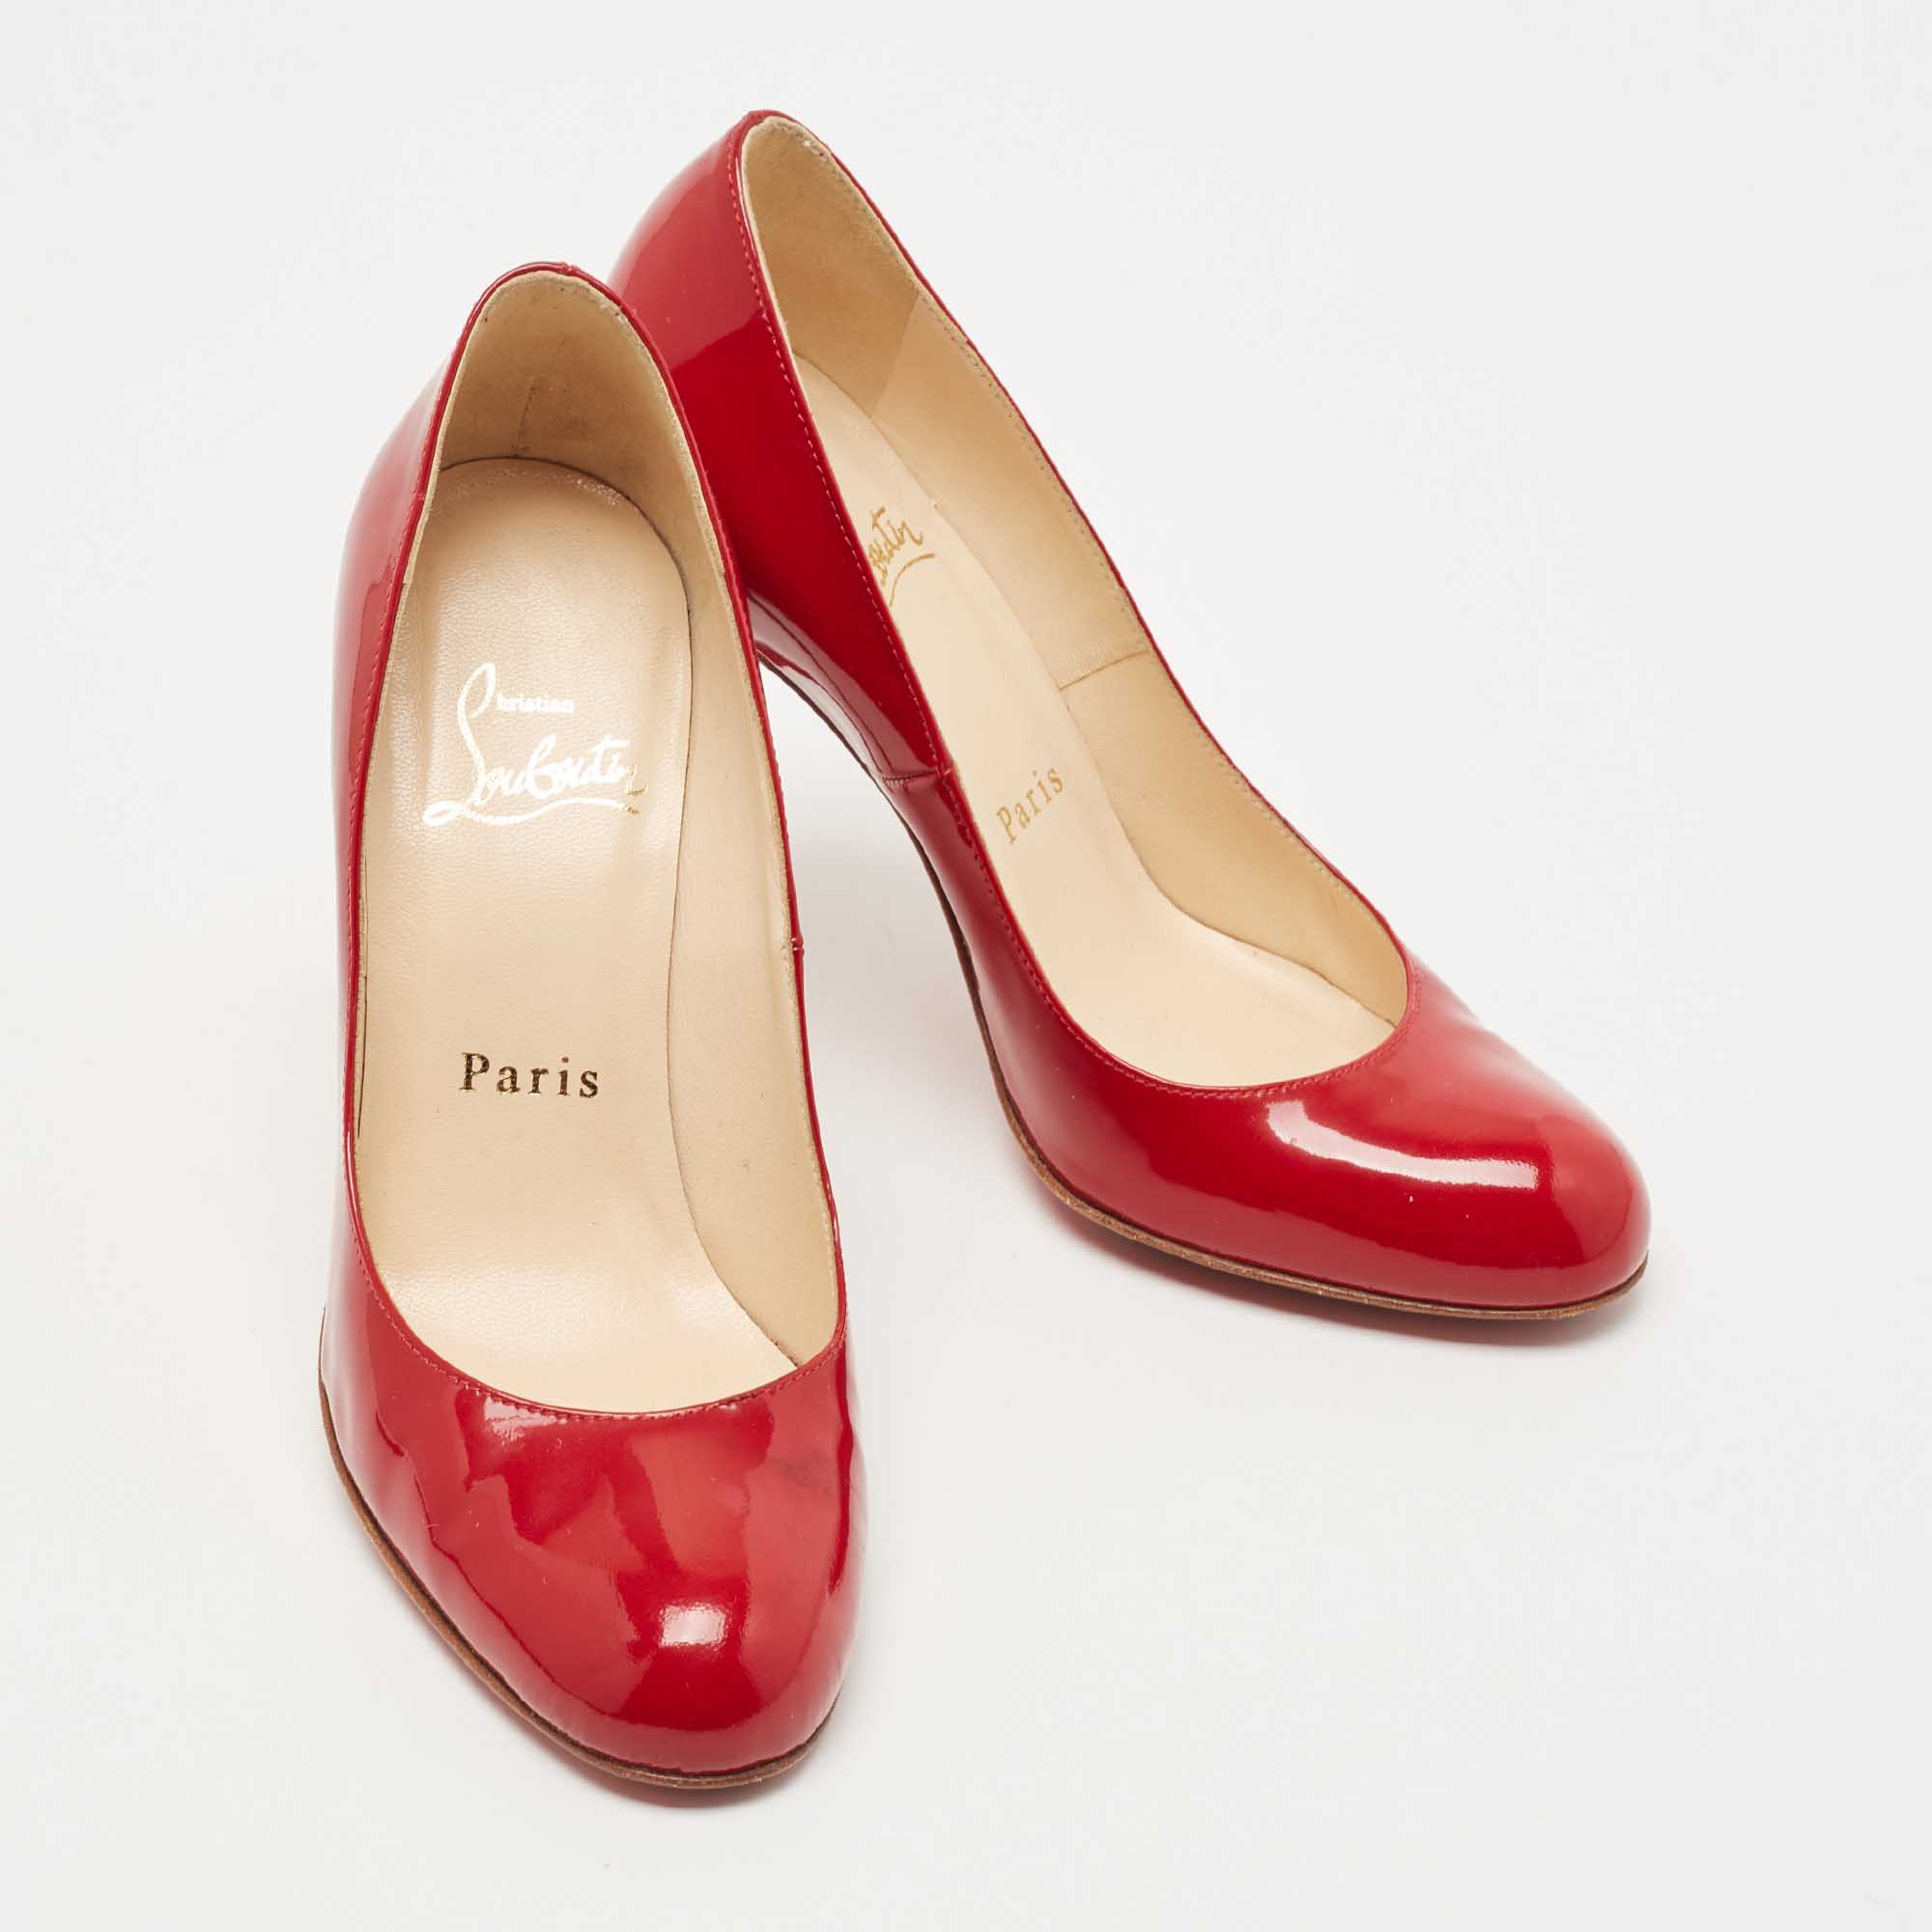 Christian Louboutin Red Patent Simple Pumps Size 34.5